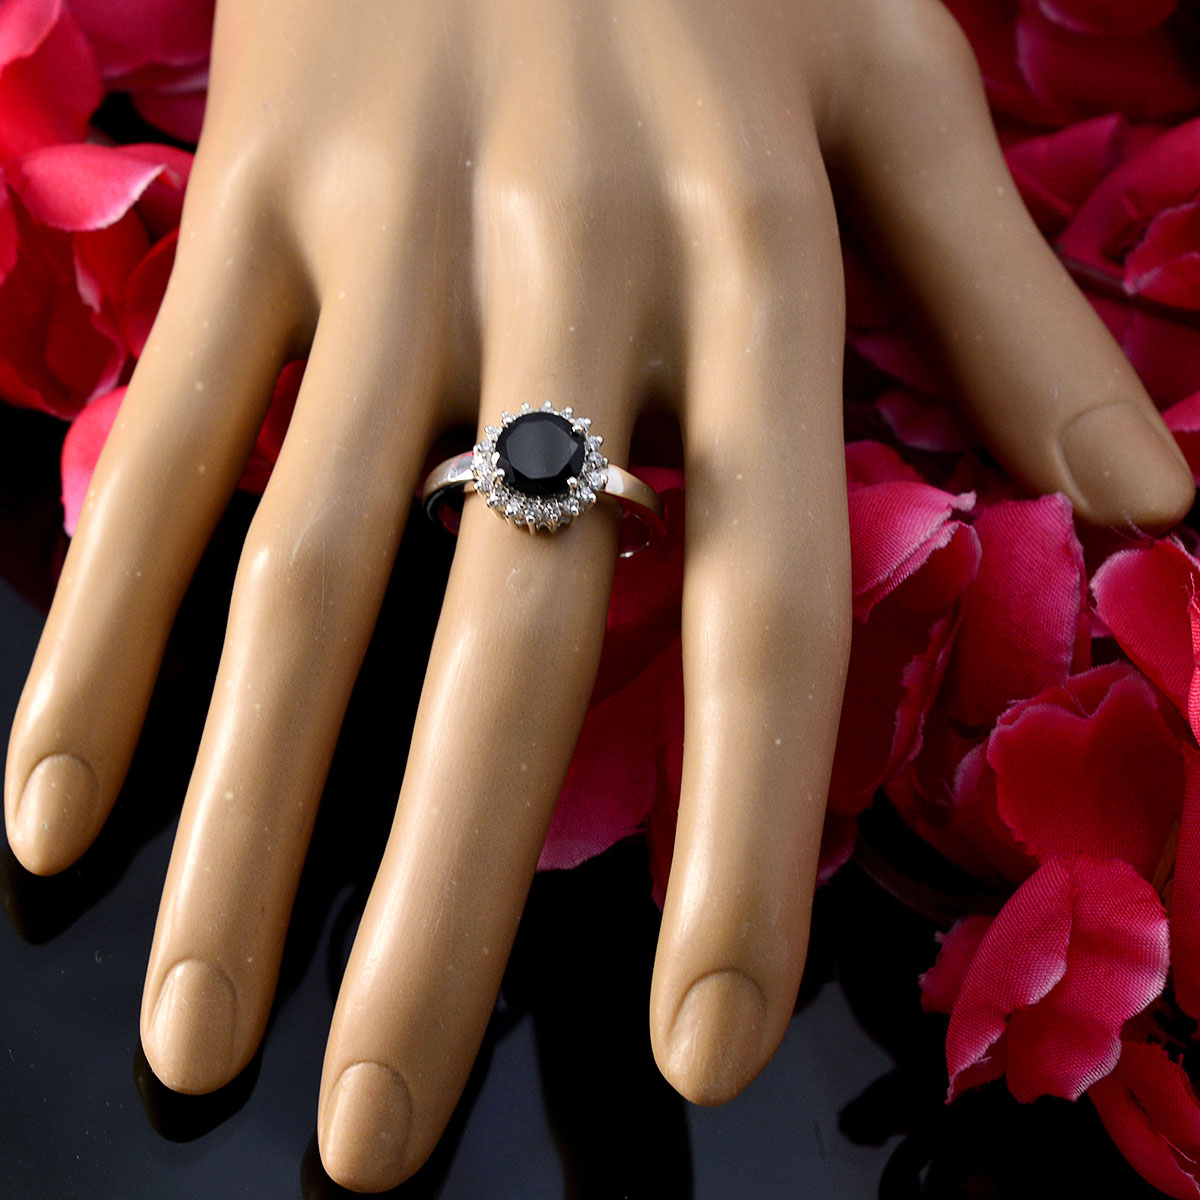 Indian Stone Black Onyx 925 Sterling Silver Ring Jewelry Factory